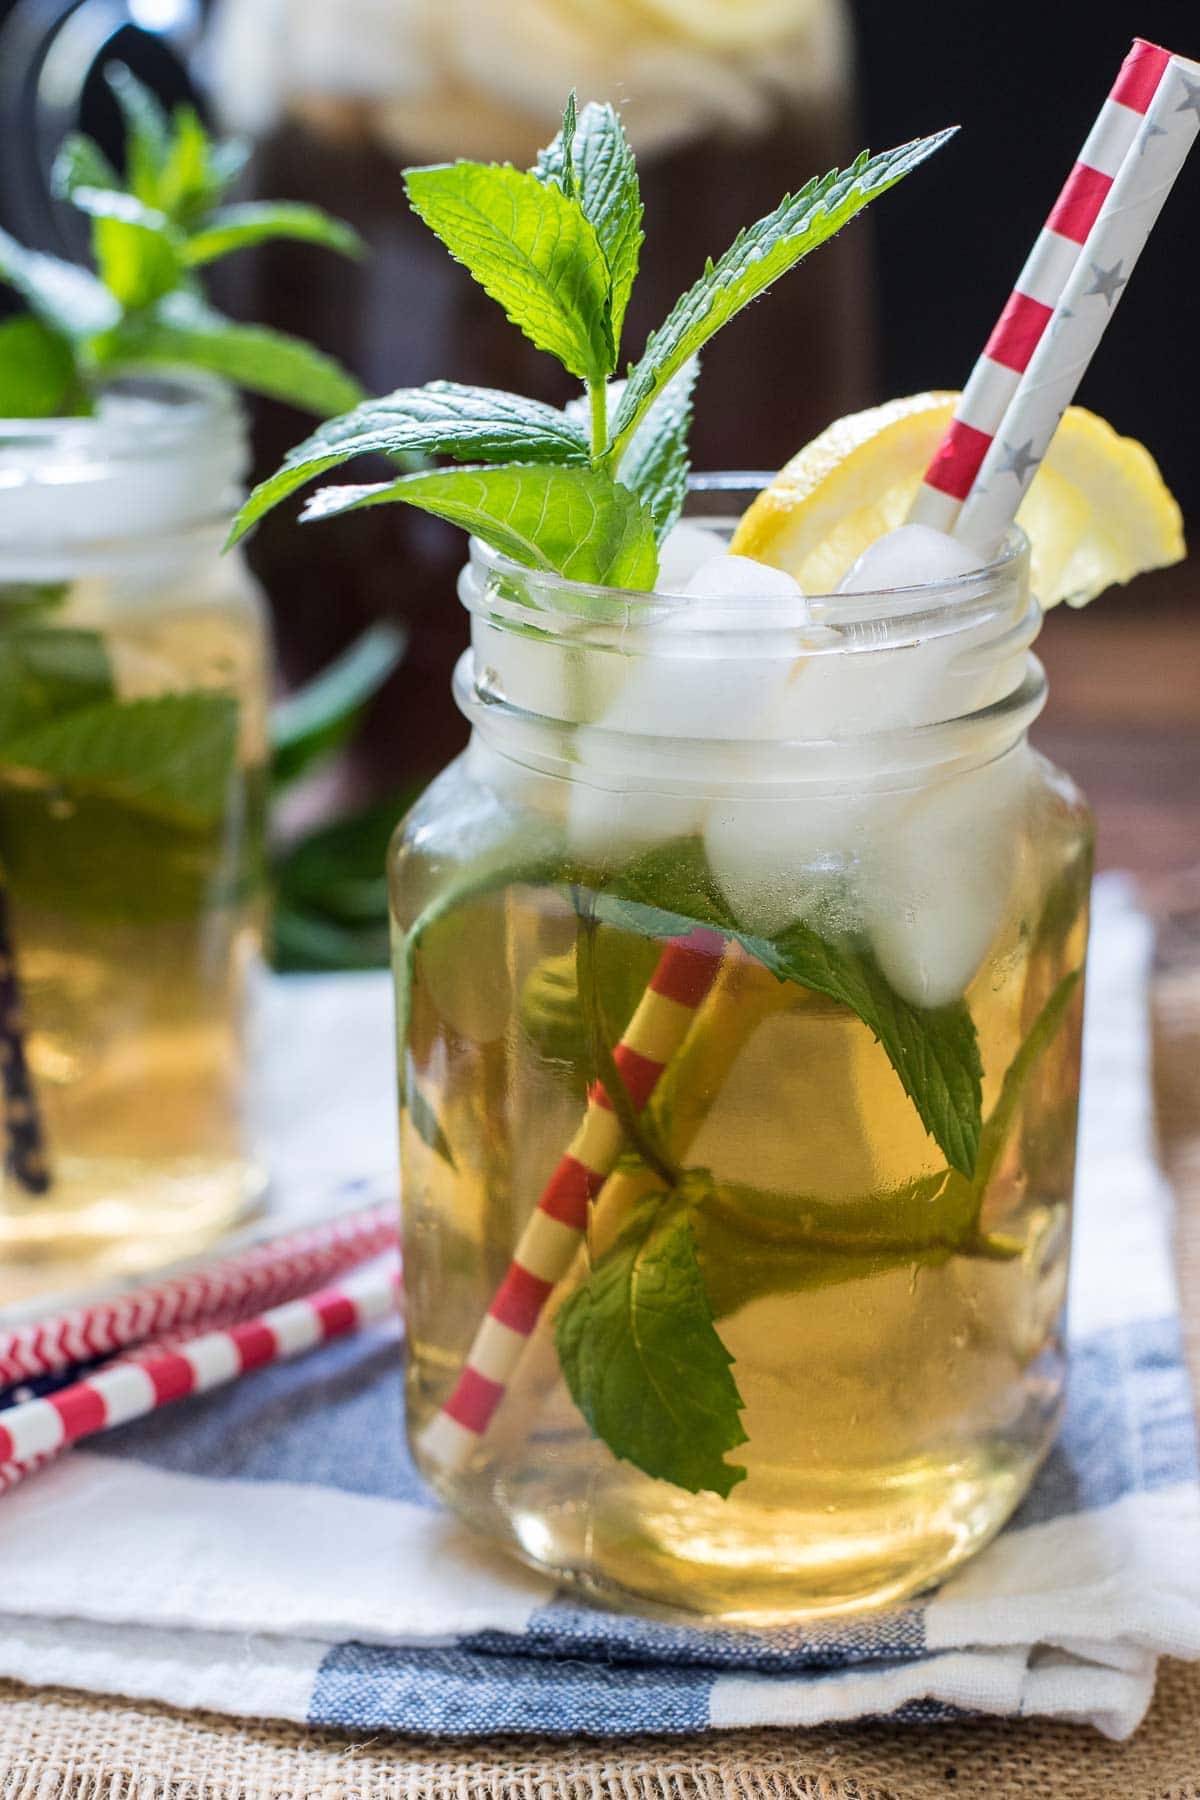 Make this refreshing Mint Iced Tea recipe on the stove top or in an ice maker. It's the perfect summer drink!